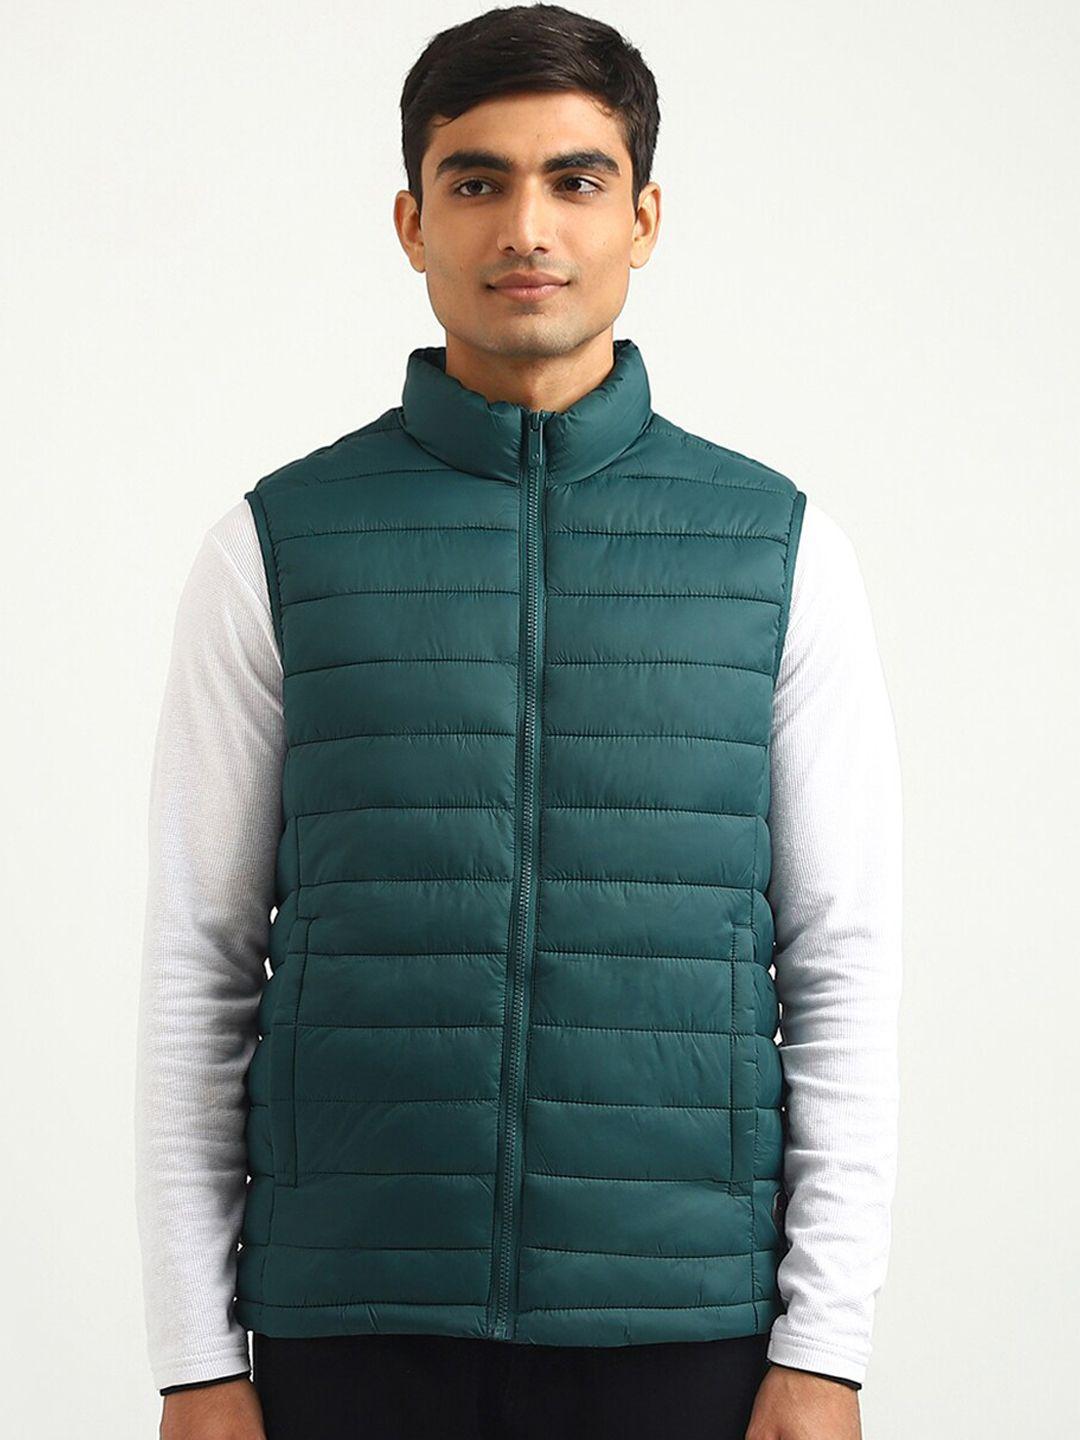 united-colors-of-benetton-men-teal-puffer-jacket